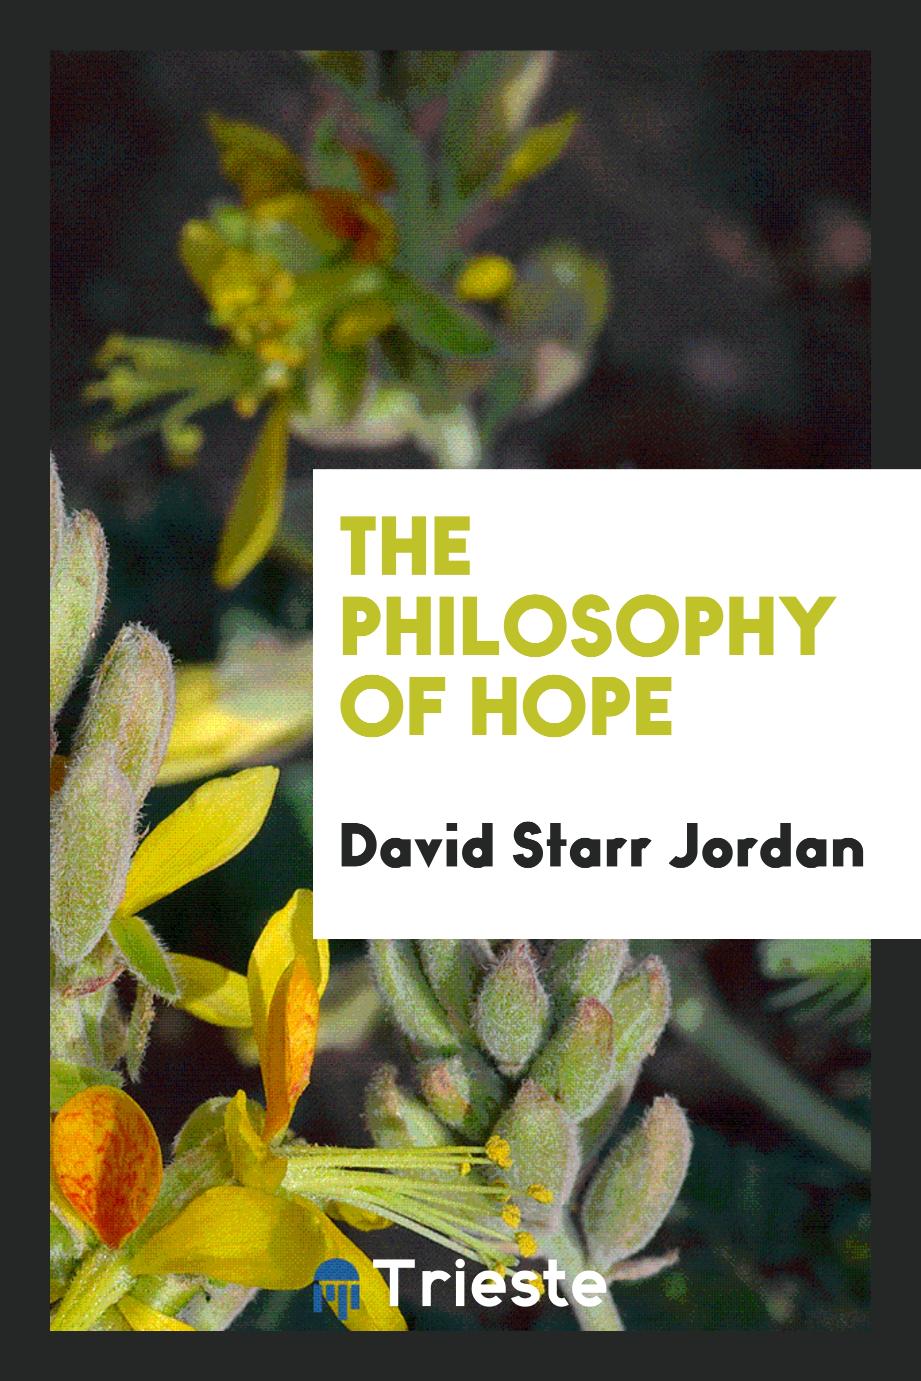 The philosophy of hope